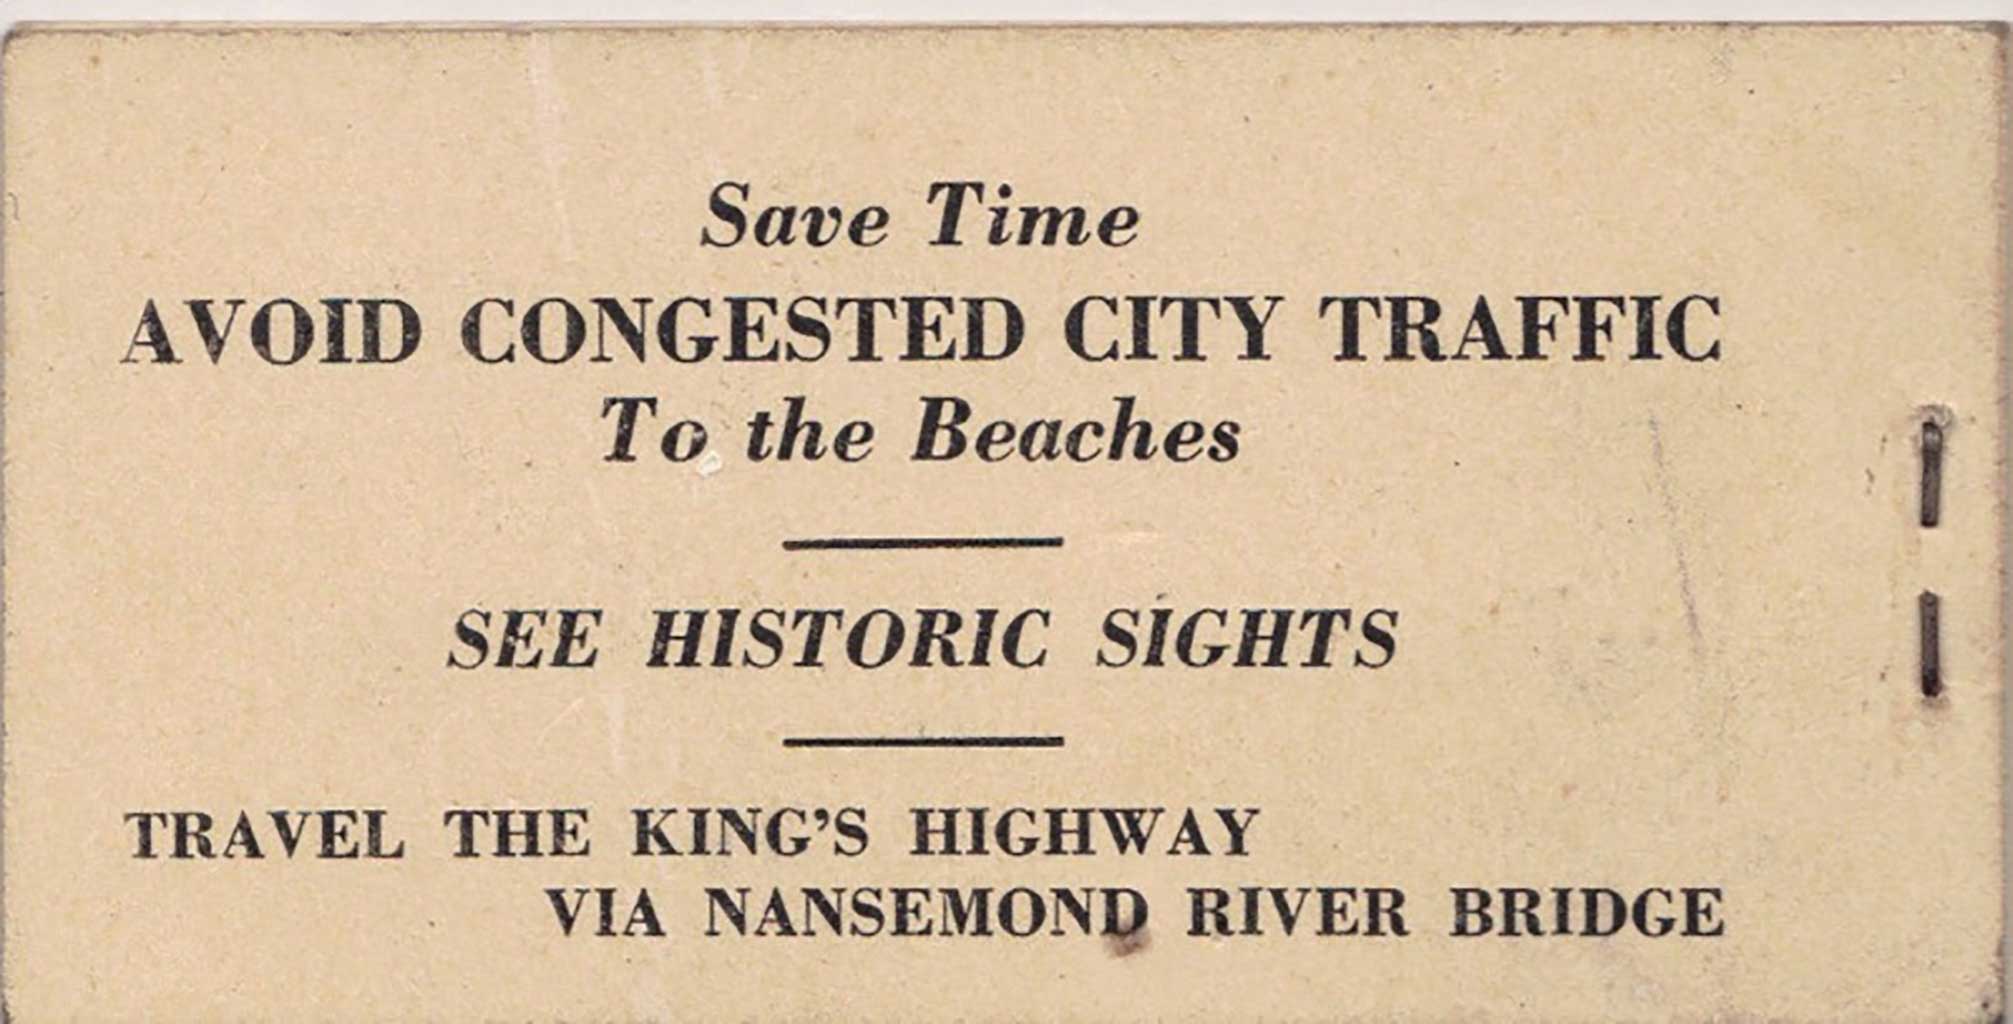 back-of-ticket-book-for-kings-highway-bridge-wright-family